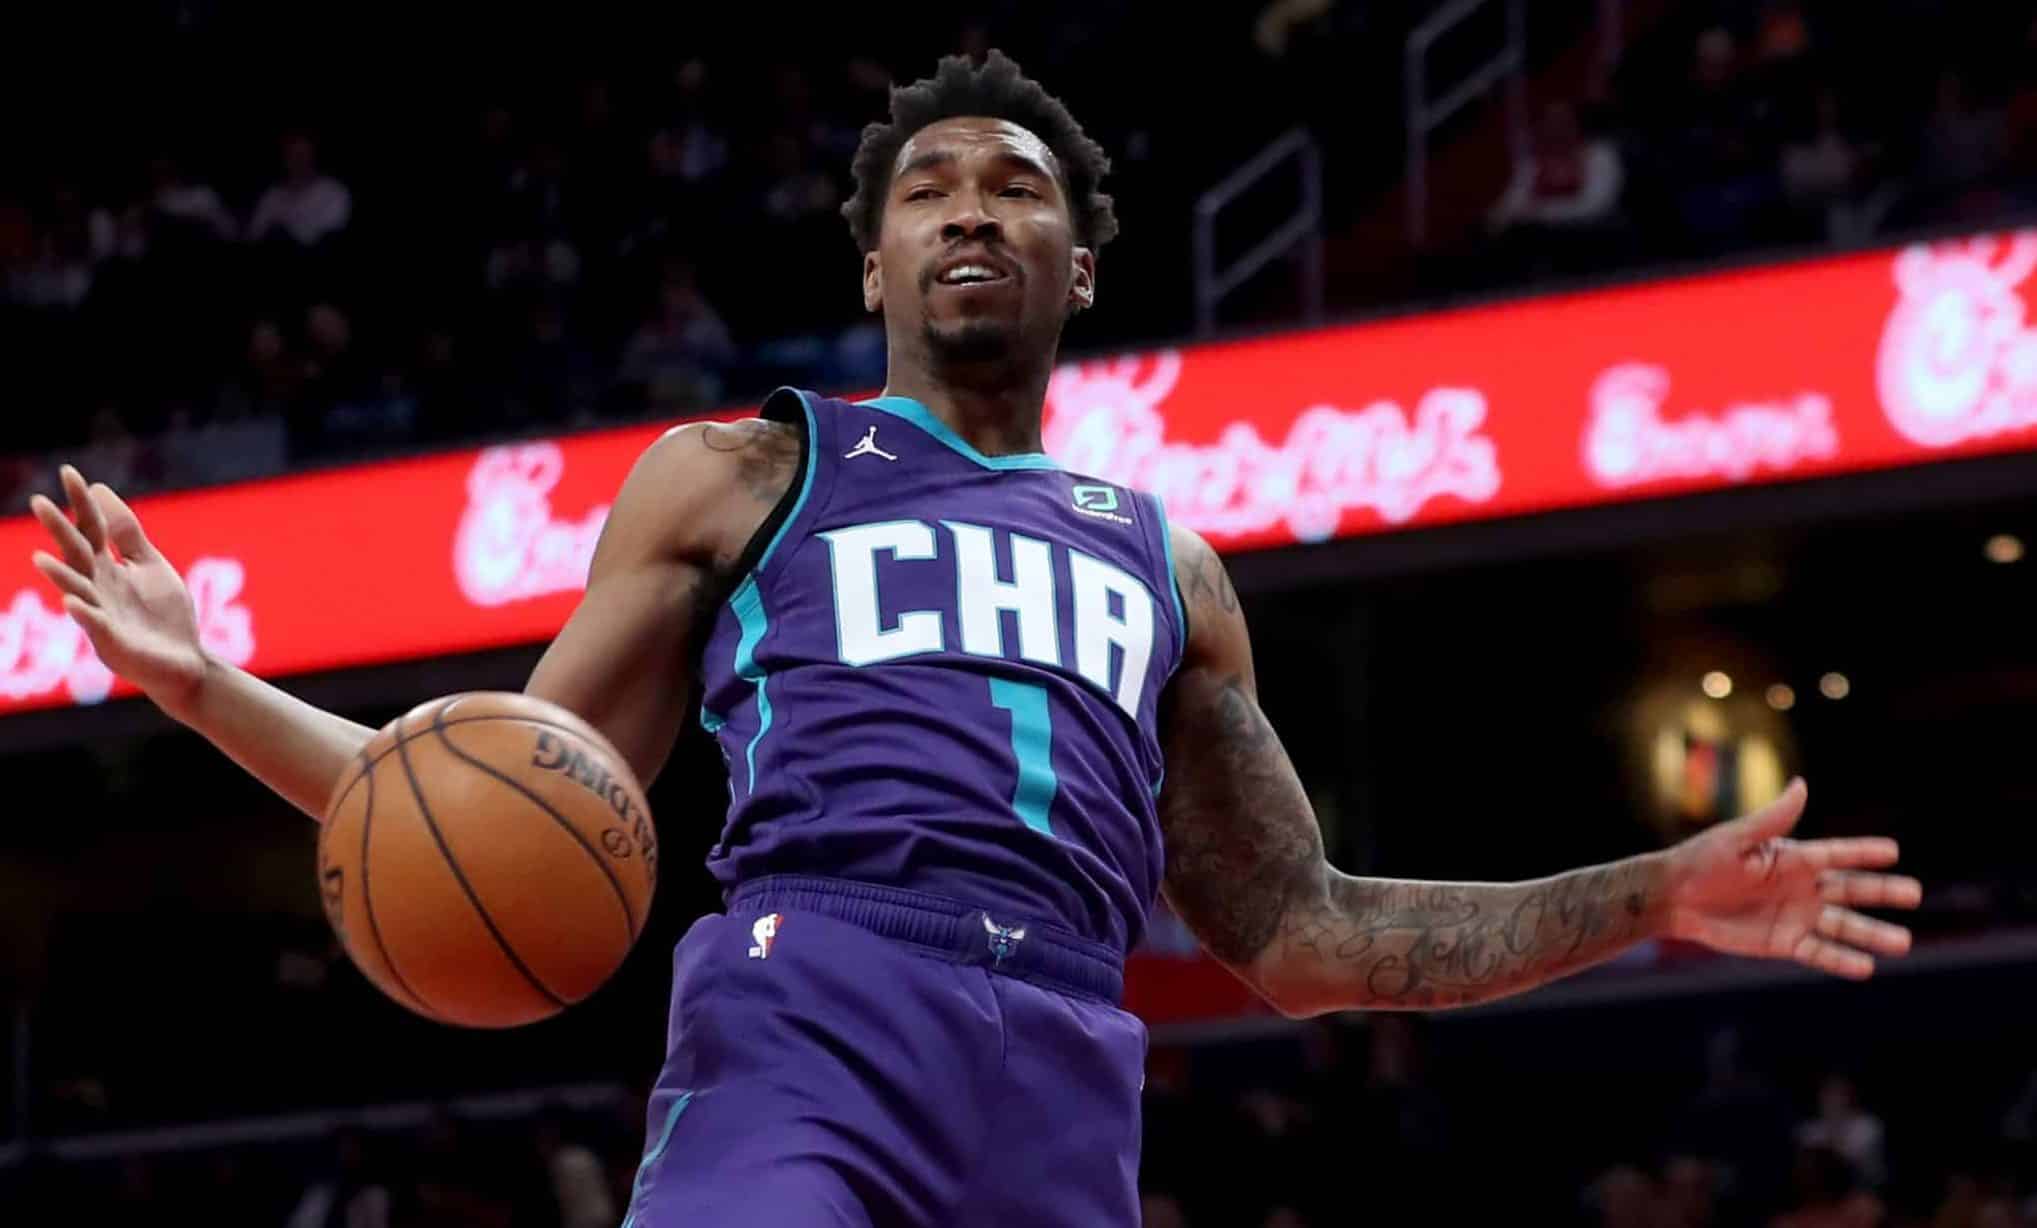 WASHINGTON, DC - NOVEMBER 22: Malik Monk #1 of the Charlotte Hornets dunks the ball against the Washington Wizards in the first half at Capital One Arena on November 22, 2019 in Washington, DC. NOTE TO USER: User expressly acknowledges and agrees that, by downloading and/or using this photograph, user is consenting to the terms and conditions of the Getty Images License Agreement.